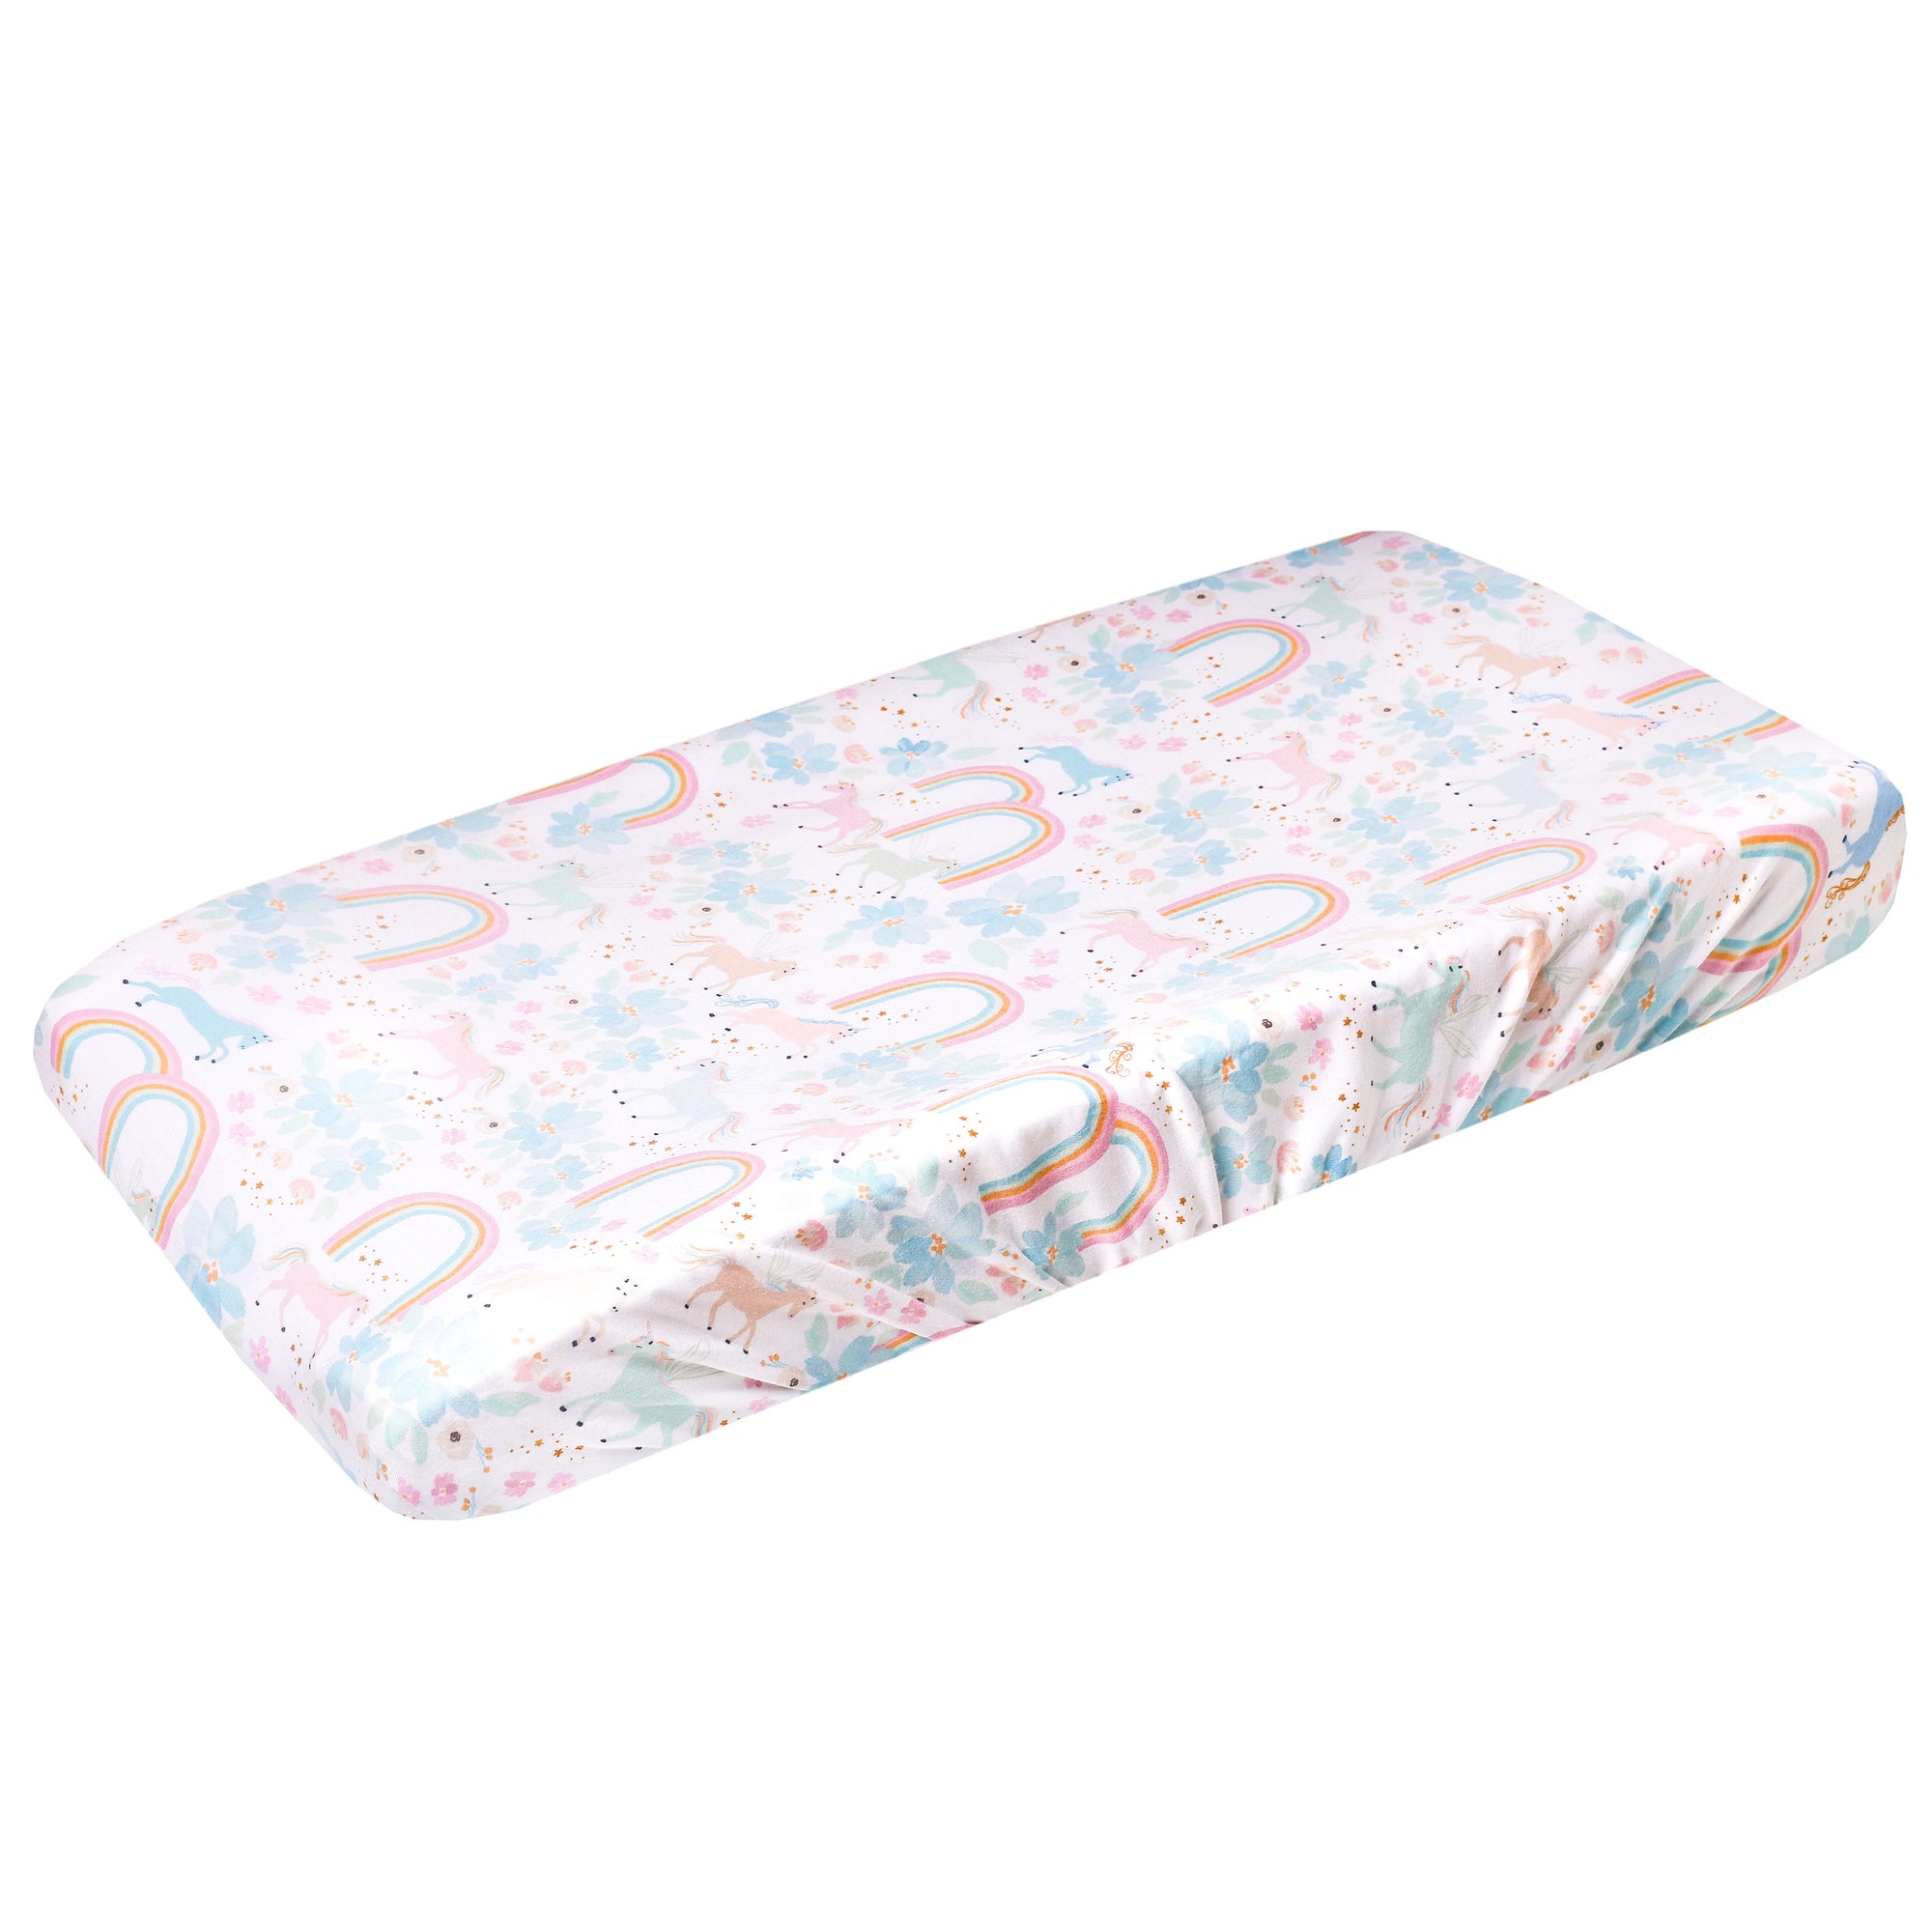 Premium Knit Diaper Changing Pad Cover - Whimsy